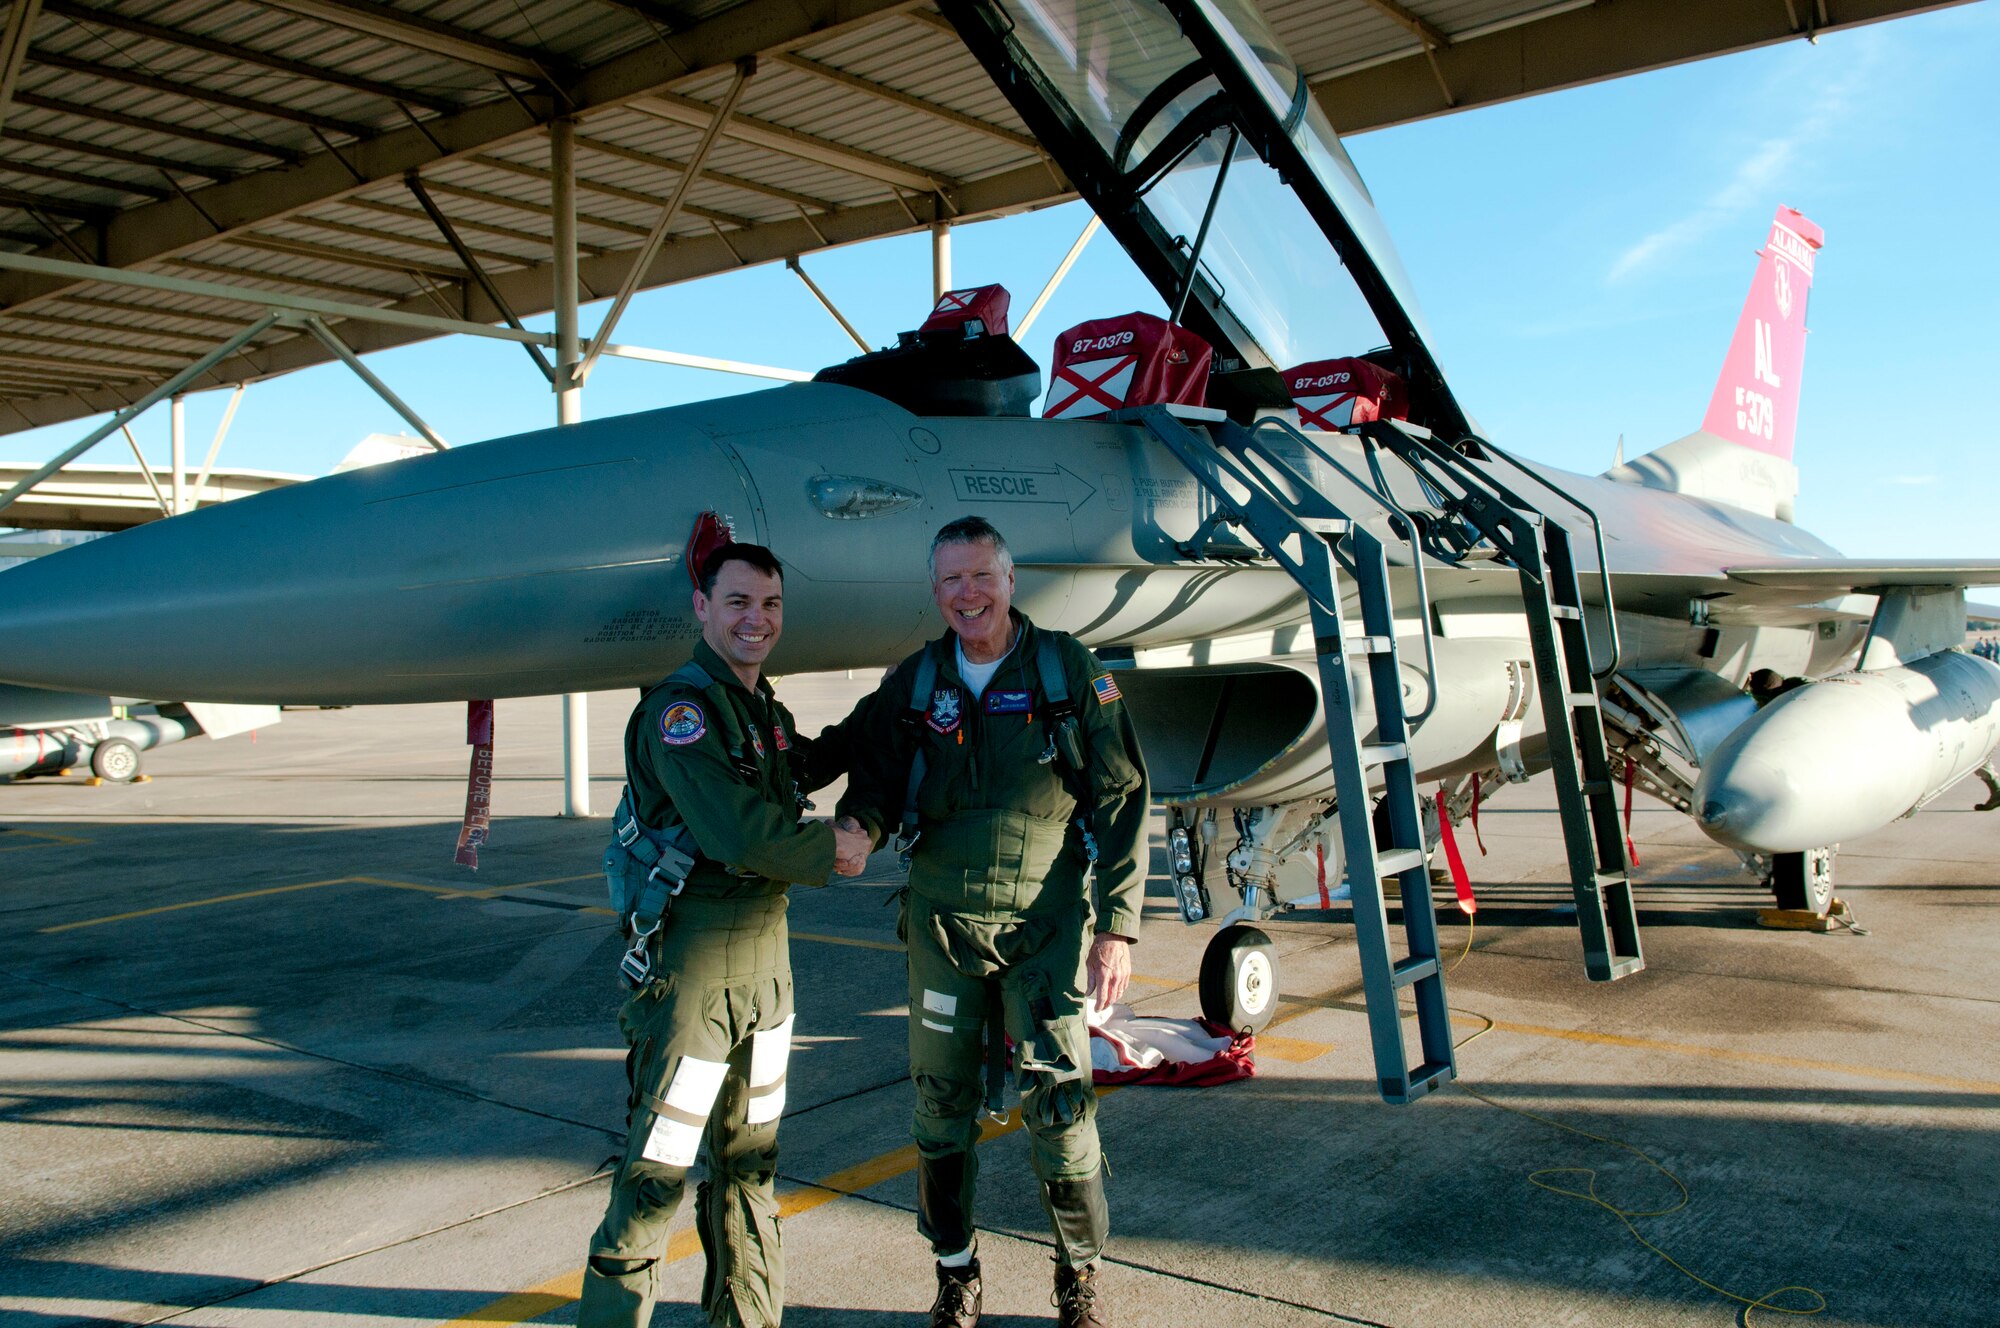 Lt Col Mike McGinn, 100th Fighter Squadron Commander, poses with Billy Strickland, a local business owner, after Strickland’s orientation flight February 18, 2016. Orientation flights inform local leaders about the 187th Fighter Wing mission and can increase awareness of the wing in the community. (U.S. Air National Guard photo by Senior Airman Jared Rand/Released.)